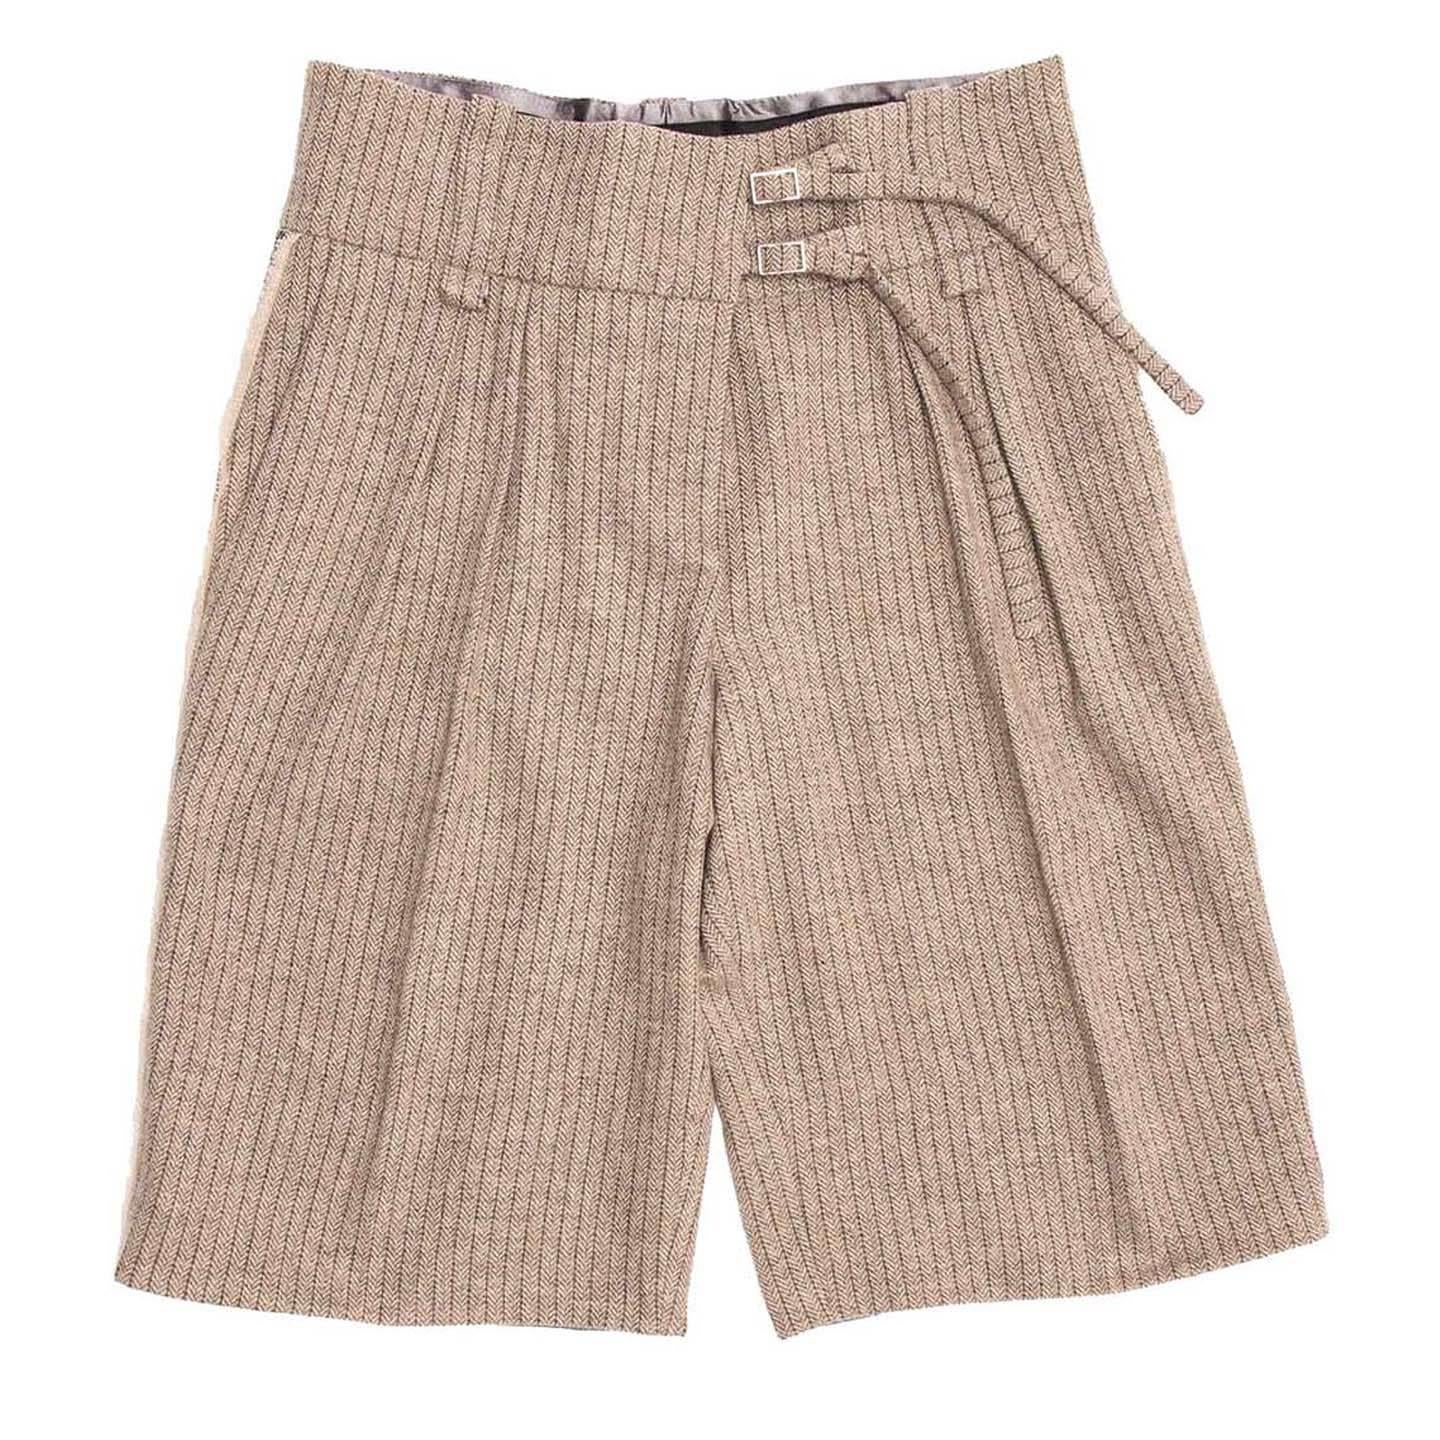 Khaki Bermuda Style Herringbone Wool Shorts. Button front closure with 2 thin belt at wide waist band. 2 pleats and front and single welt pockets at back. Sequin tuxedo pant style taping down sides.

Size  42 French sizing

Condition  Excellent: